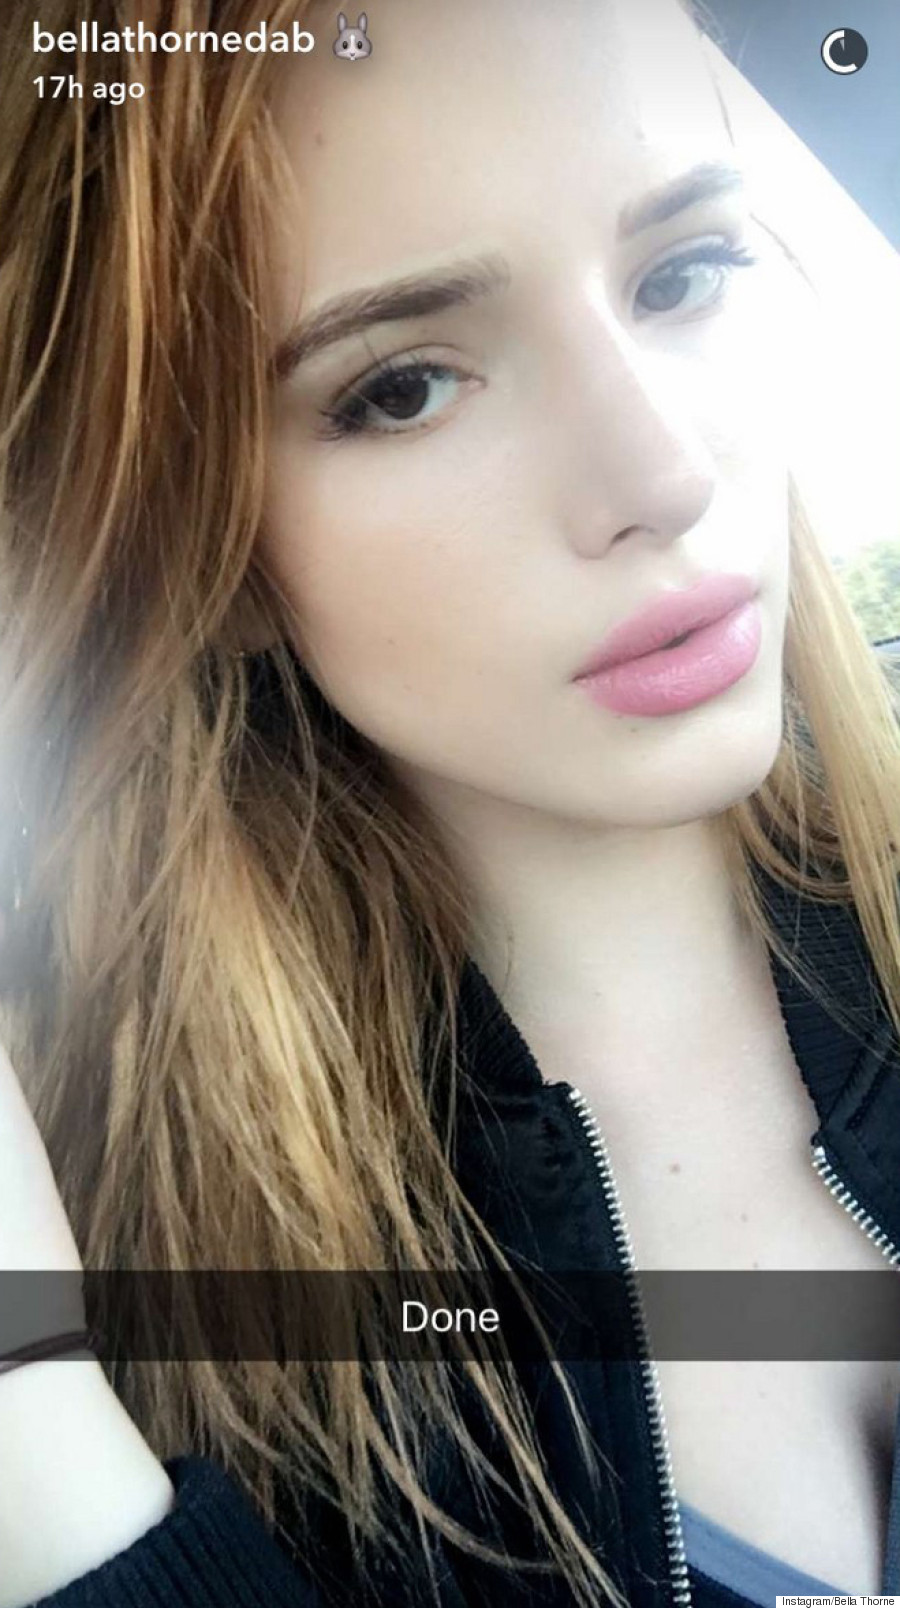 What is bella thorne snapchat